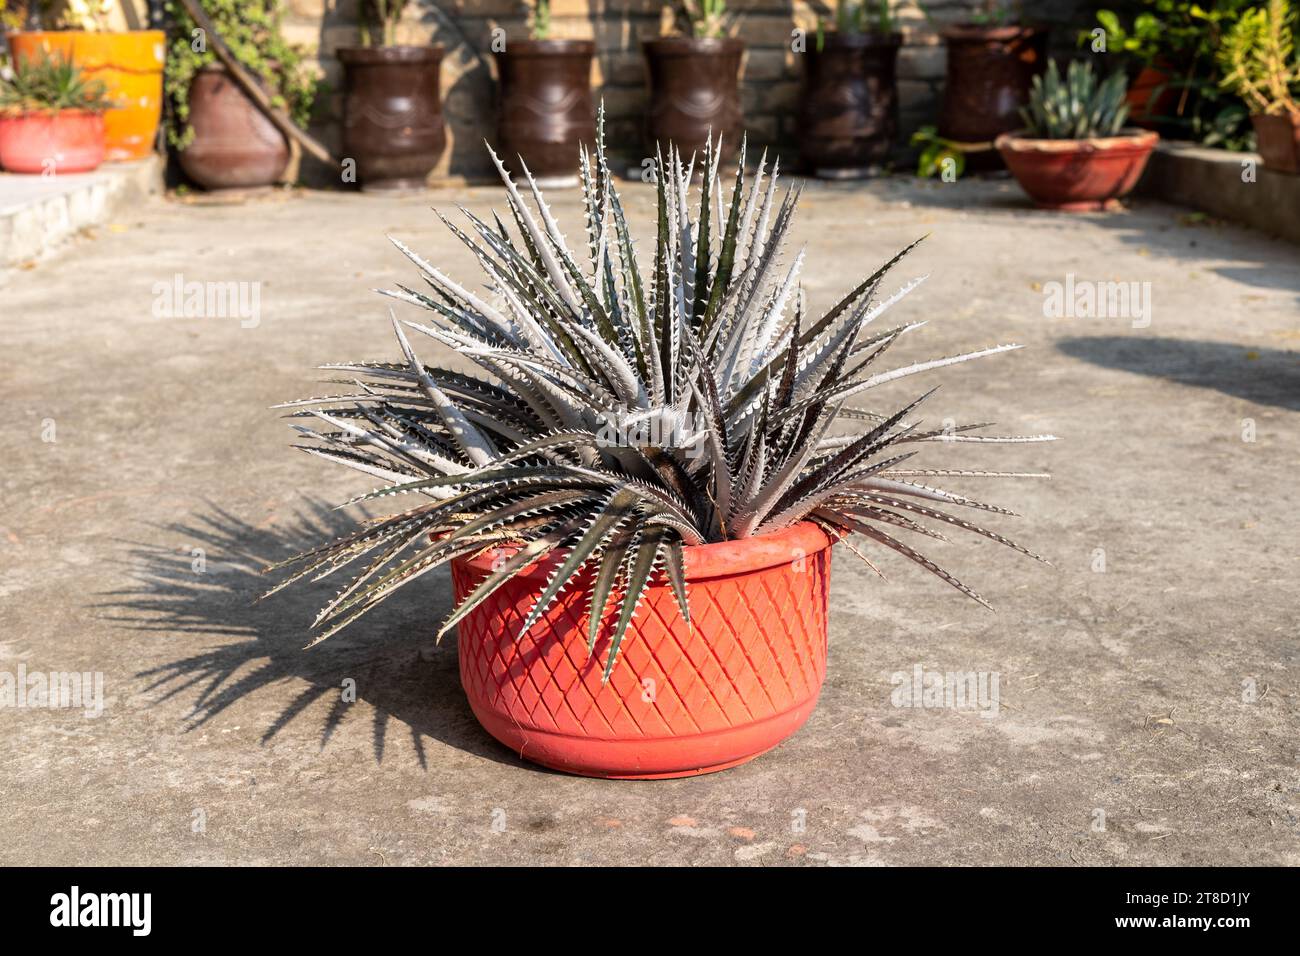 Dyckia bromeliad plant in a clay pot in the garden Stock Photo